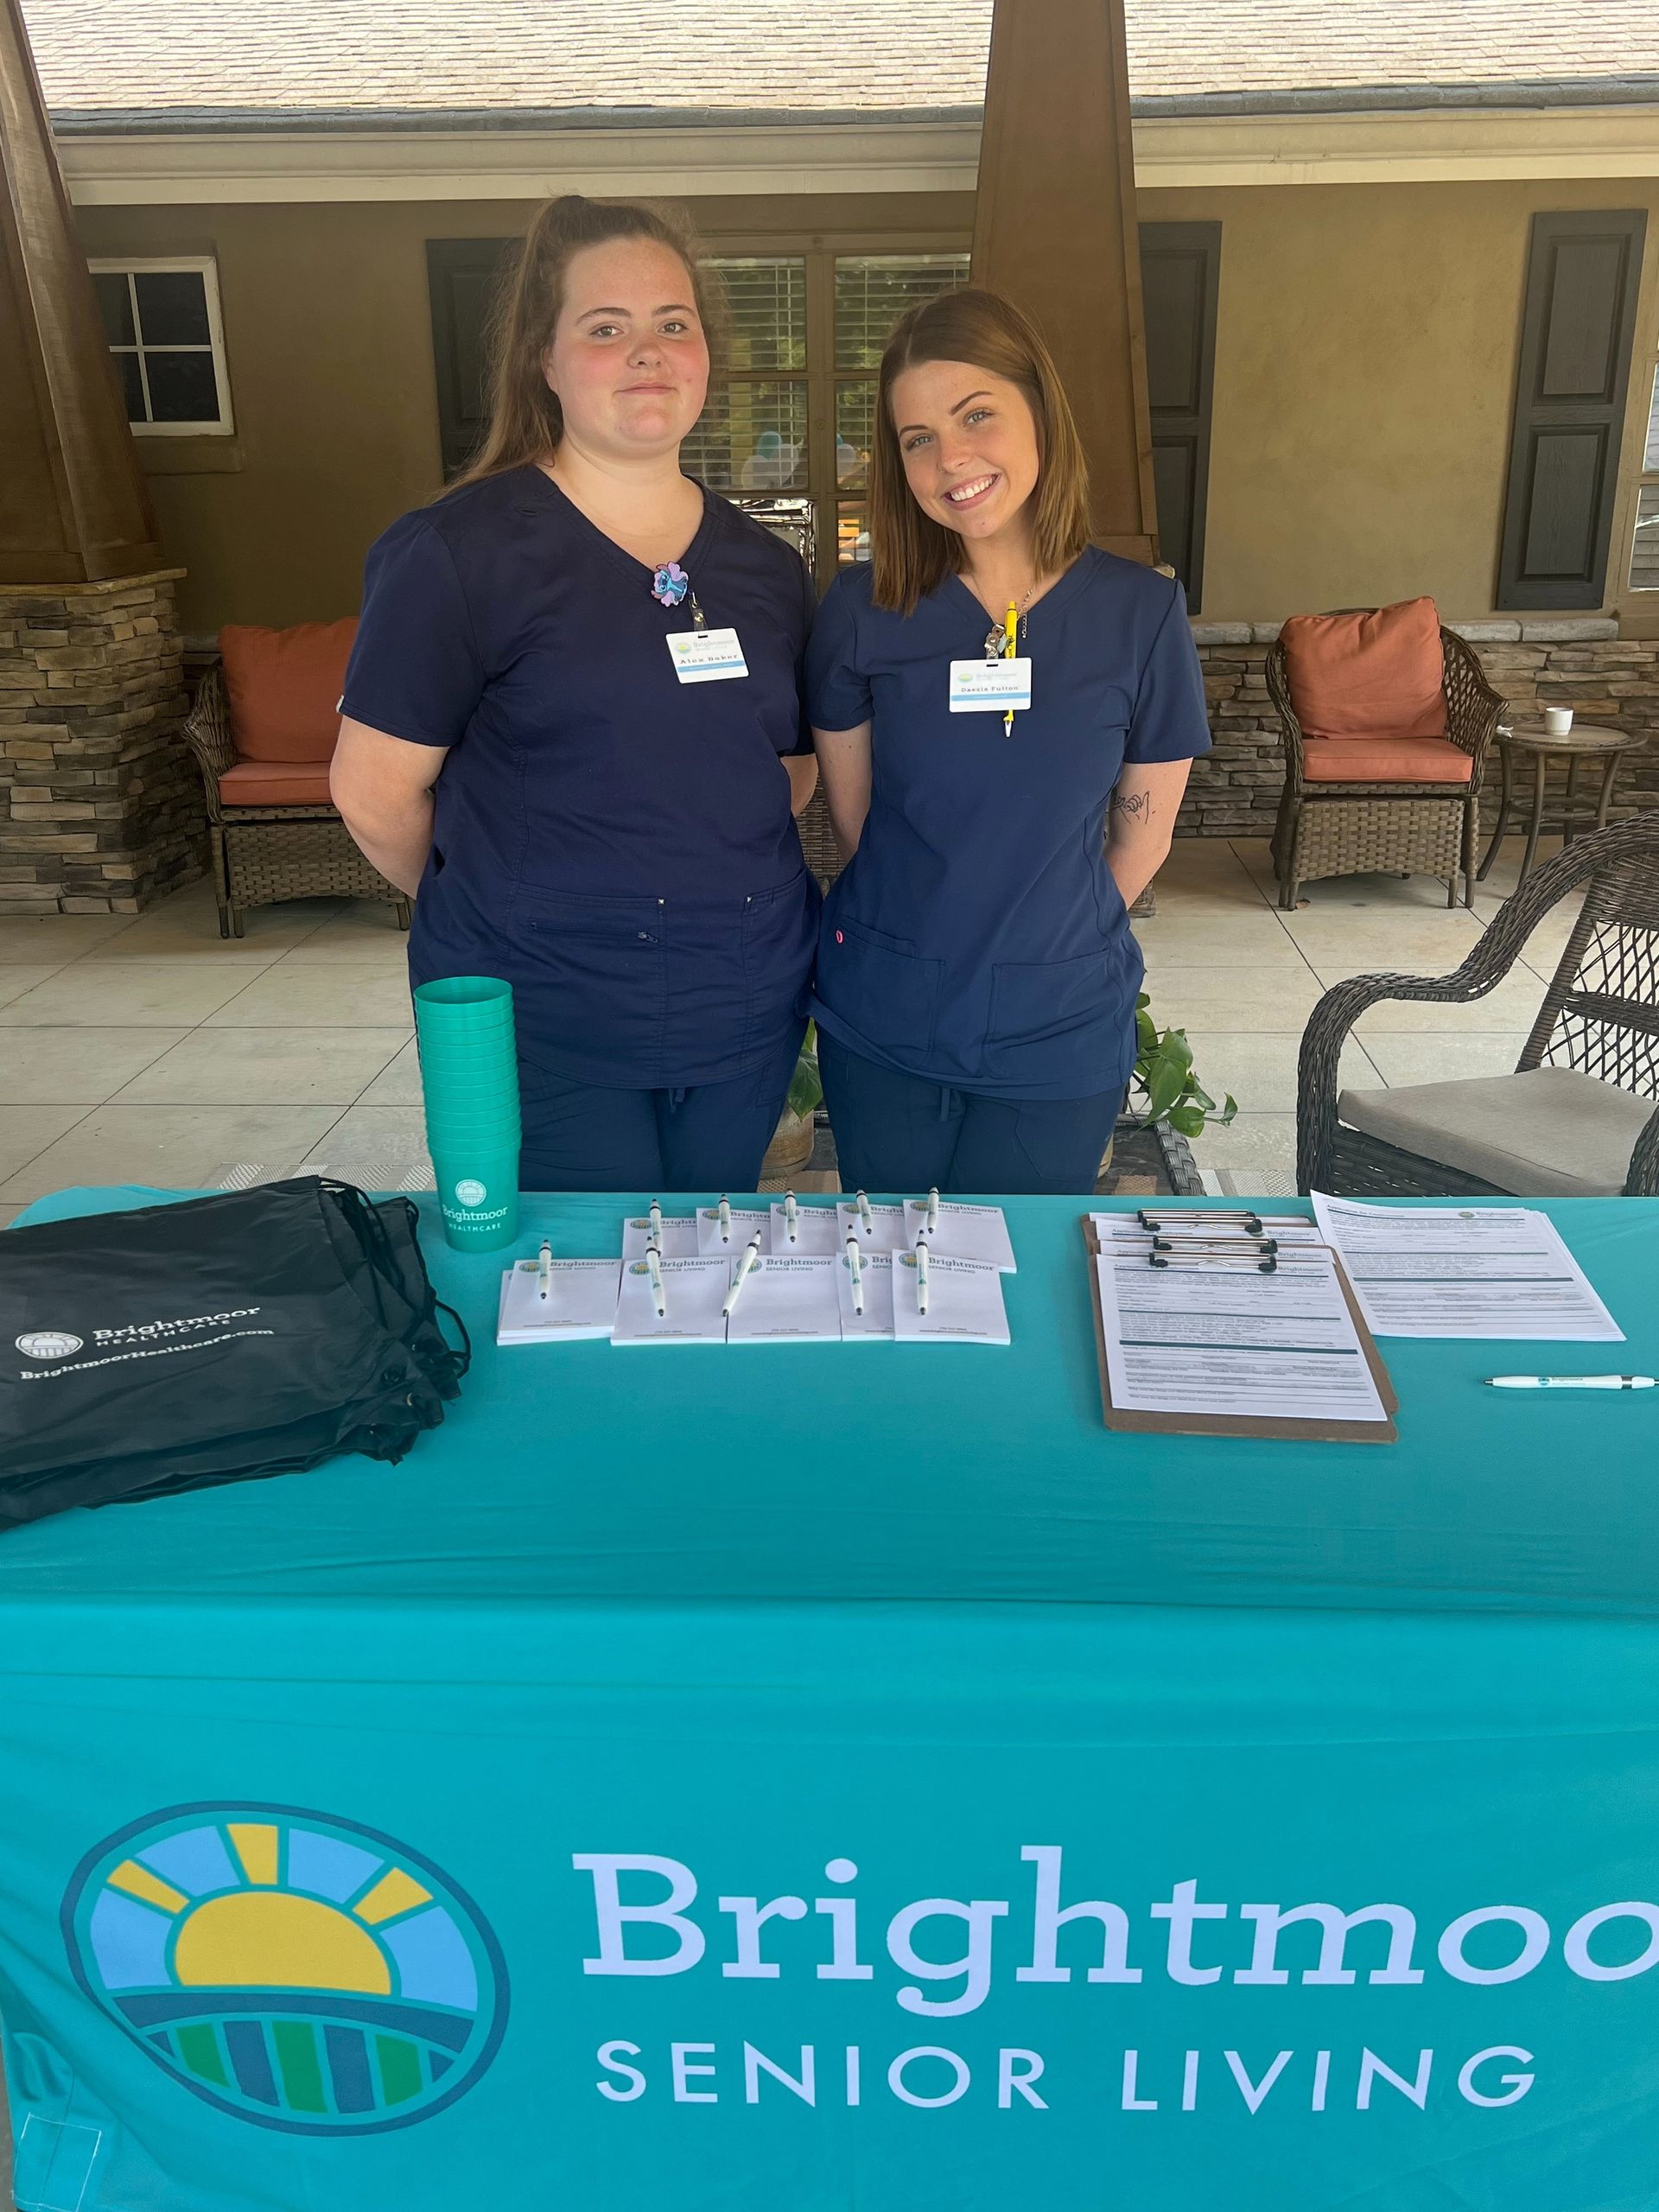 Two women standing in front of a brightmood senior living table